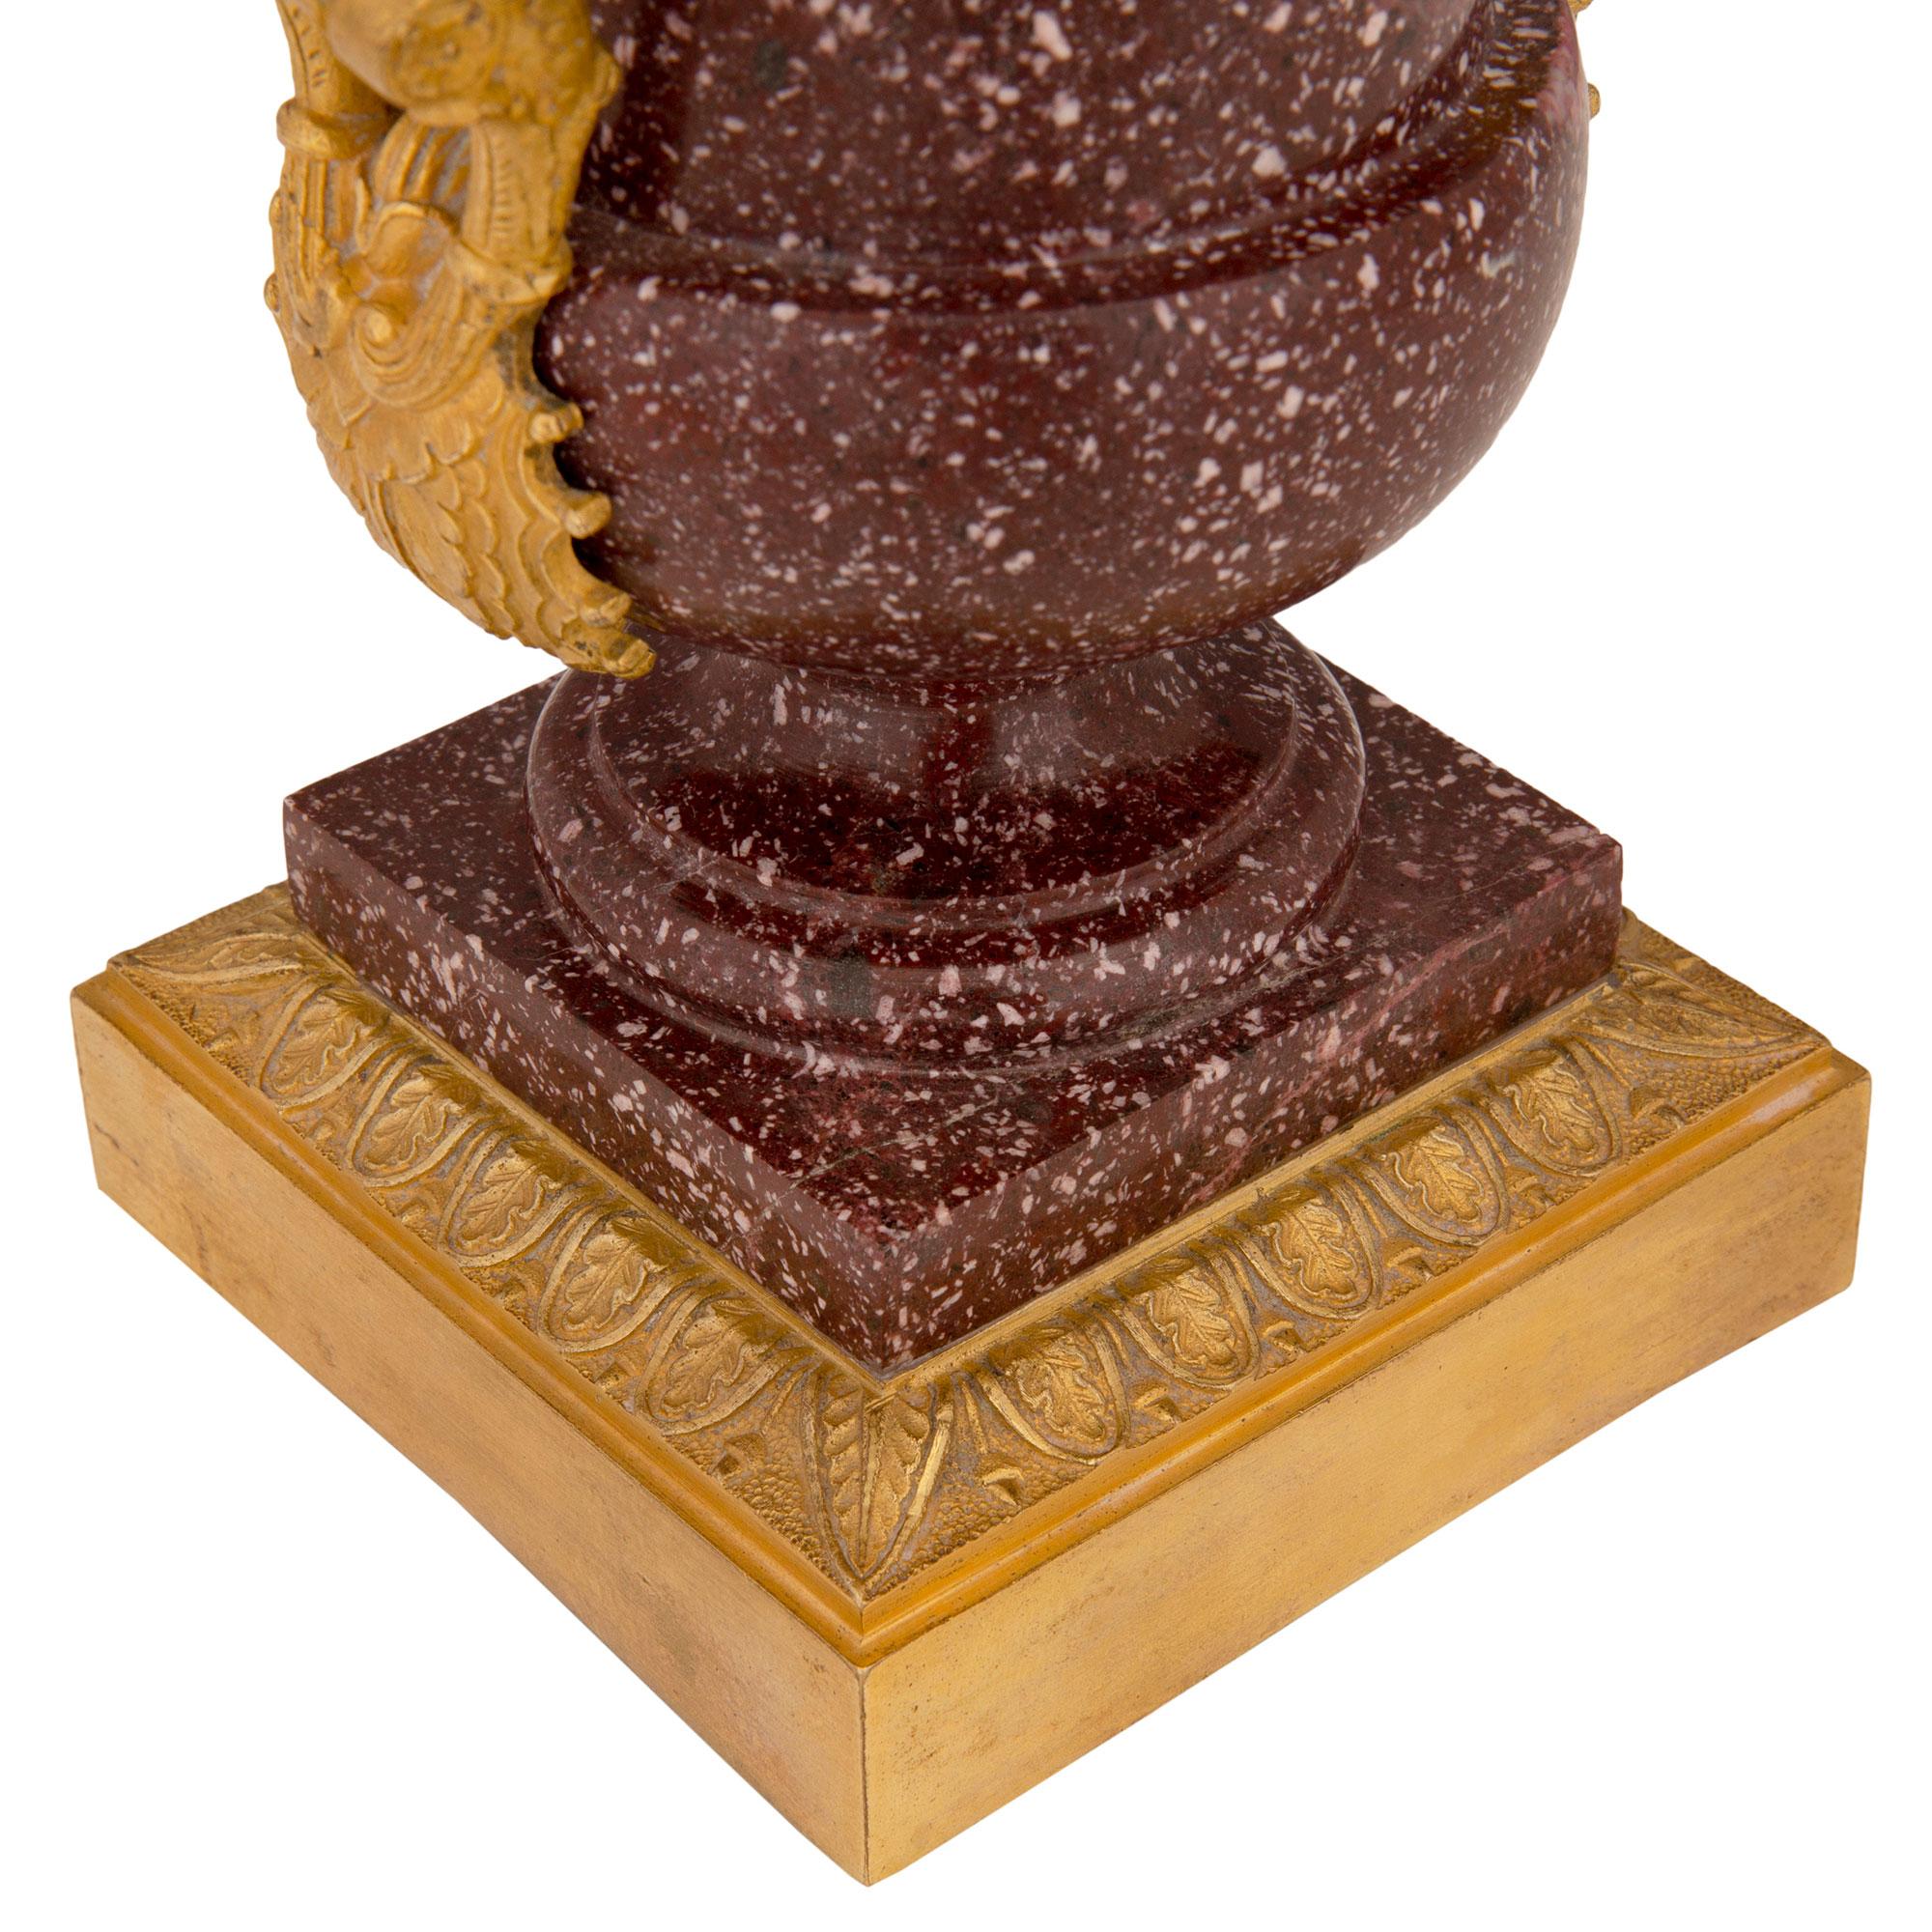  Italian 19th Century Neoclassical Style Imperial Porphyry and Ormolu Urn For Sale 1